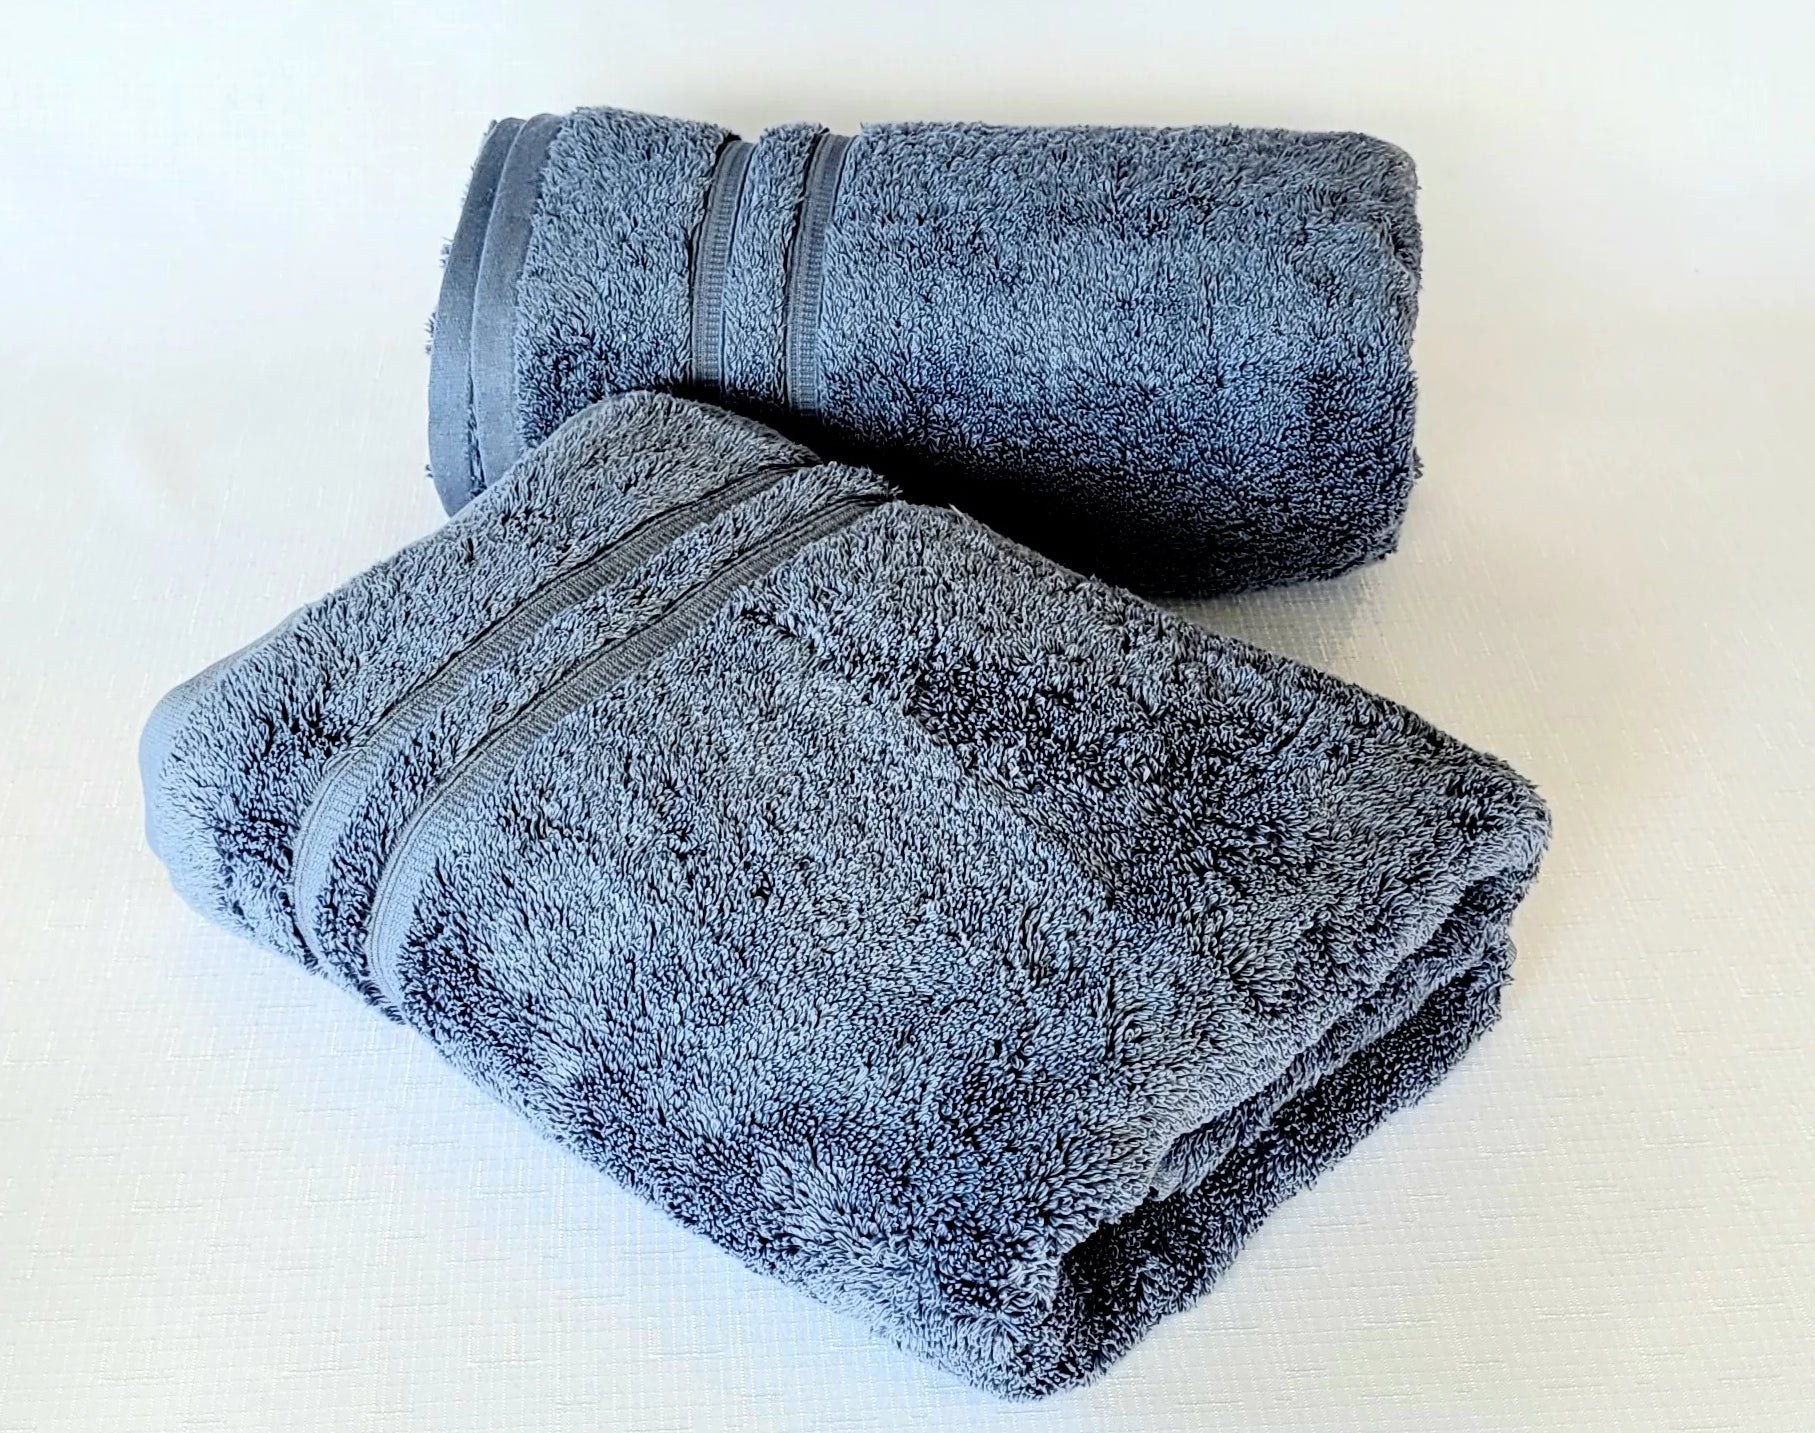 bath towel, cotton, microcotton, bamboo, terry cloth, organic, breathable, luxury, premium, quality, absorbency, affordable